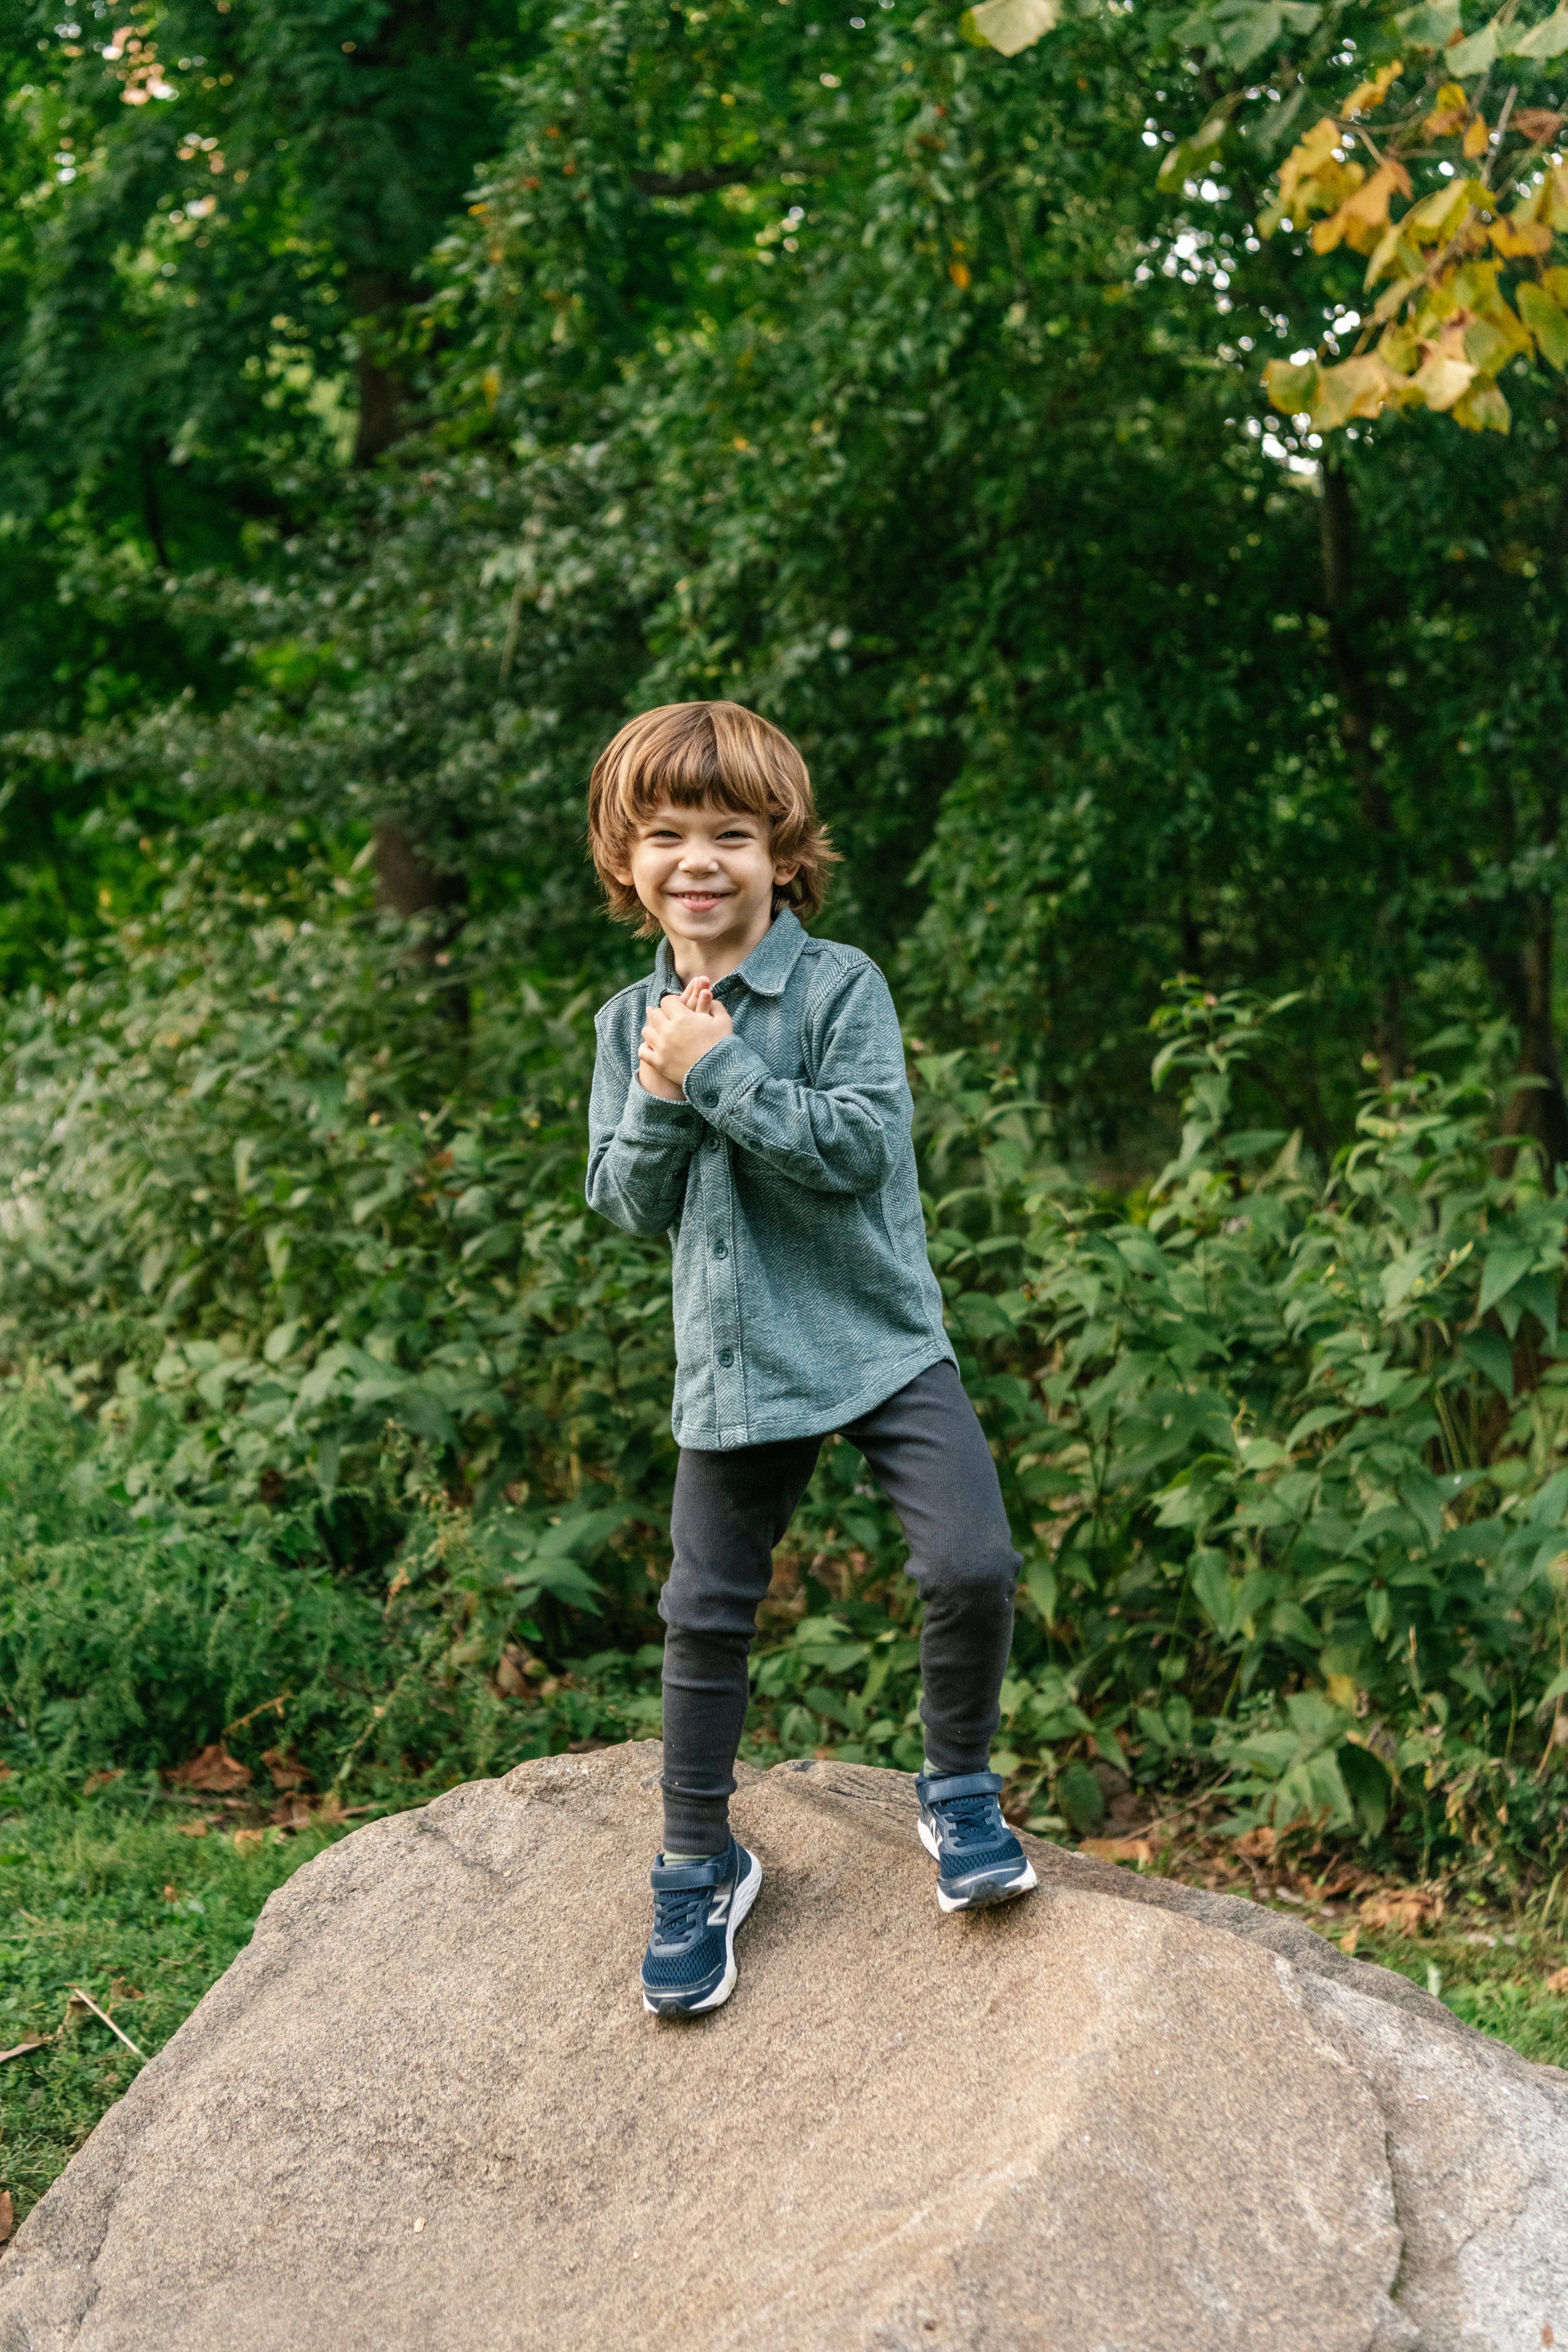  New York Family photographer captures a portrait of a young boy at Central Park by Nicole Hawkins PHotography. boy exploring portrait family photos in Central Park #NicoleHawkinsPhotography #NicoleHawkinsFamilies #NJphotographers #familyphotos #Cent